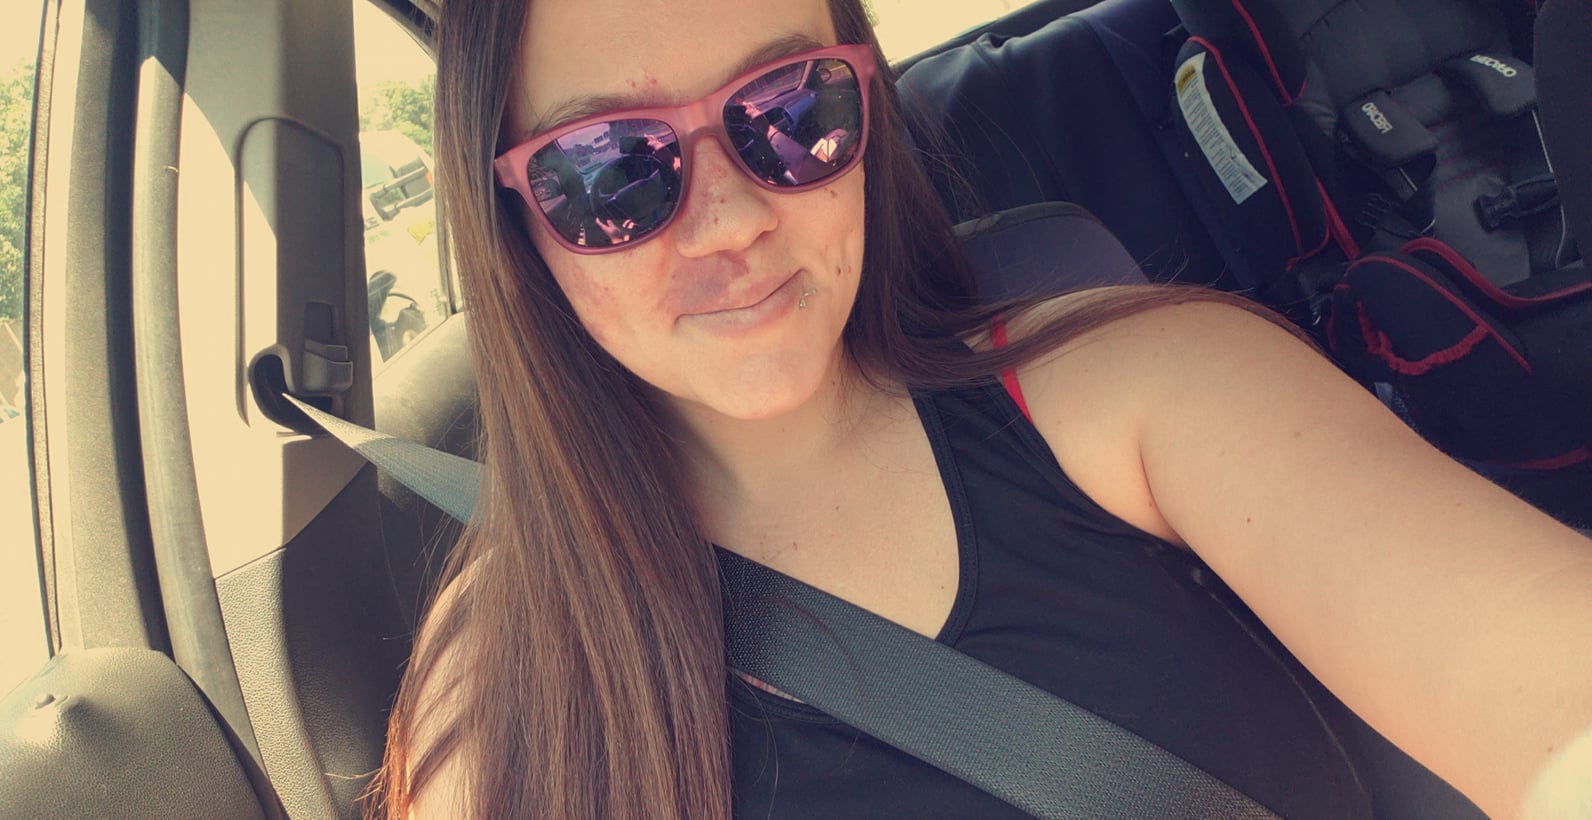 A woman in a car wearing sunglasses, taking a selfie, her birthmark on her lip and cheek.